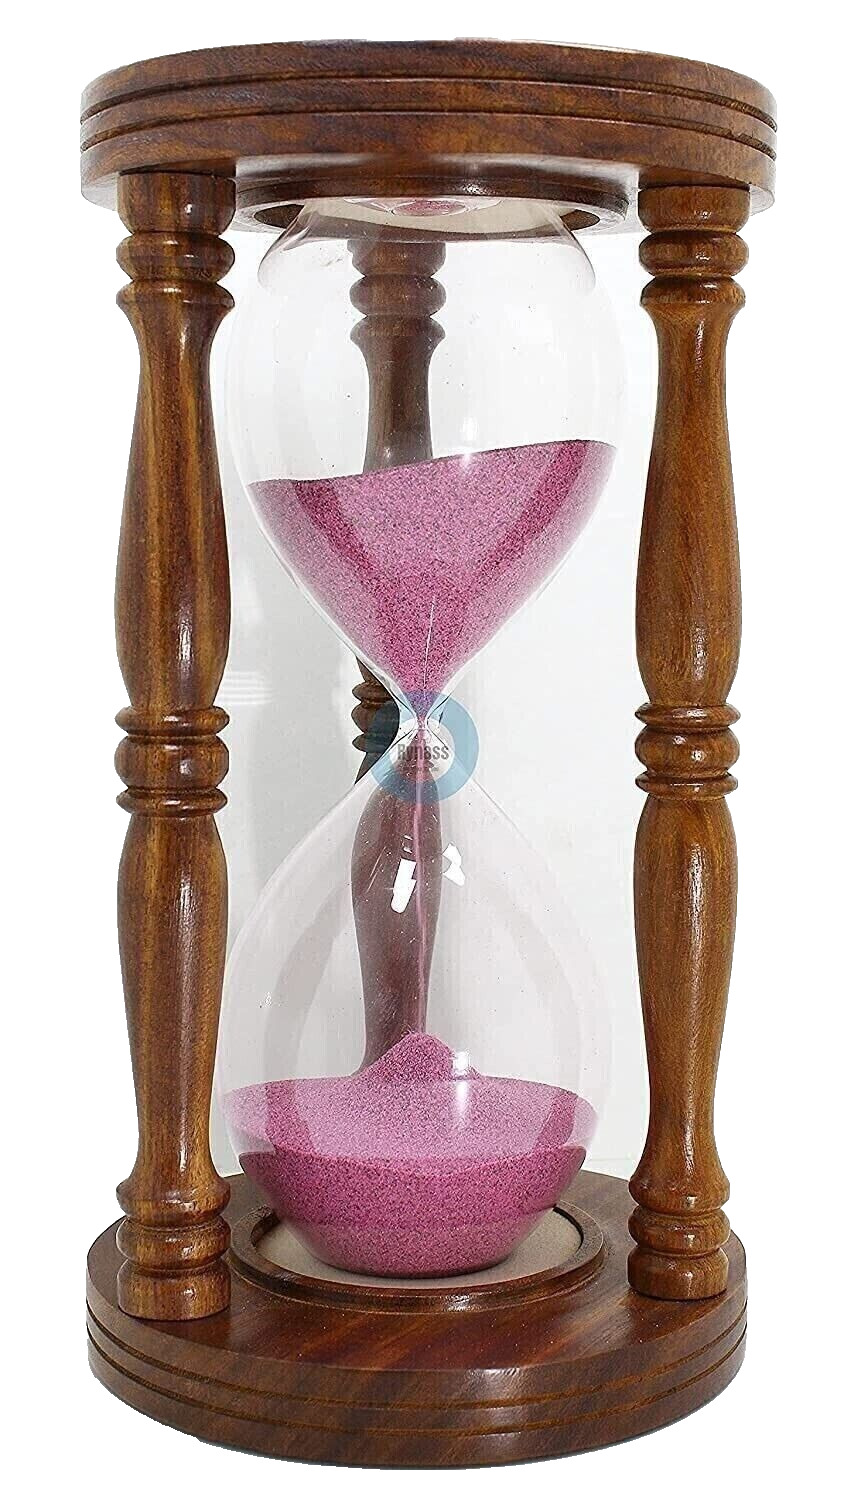 60 Minutes Wooden Sand Timer Hourglass , Collectible sand Timer home decorative